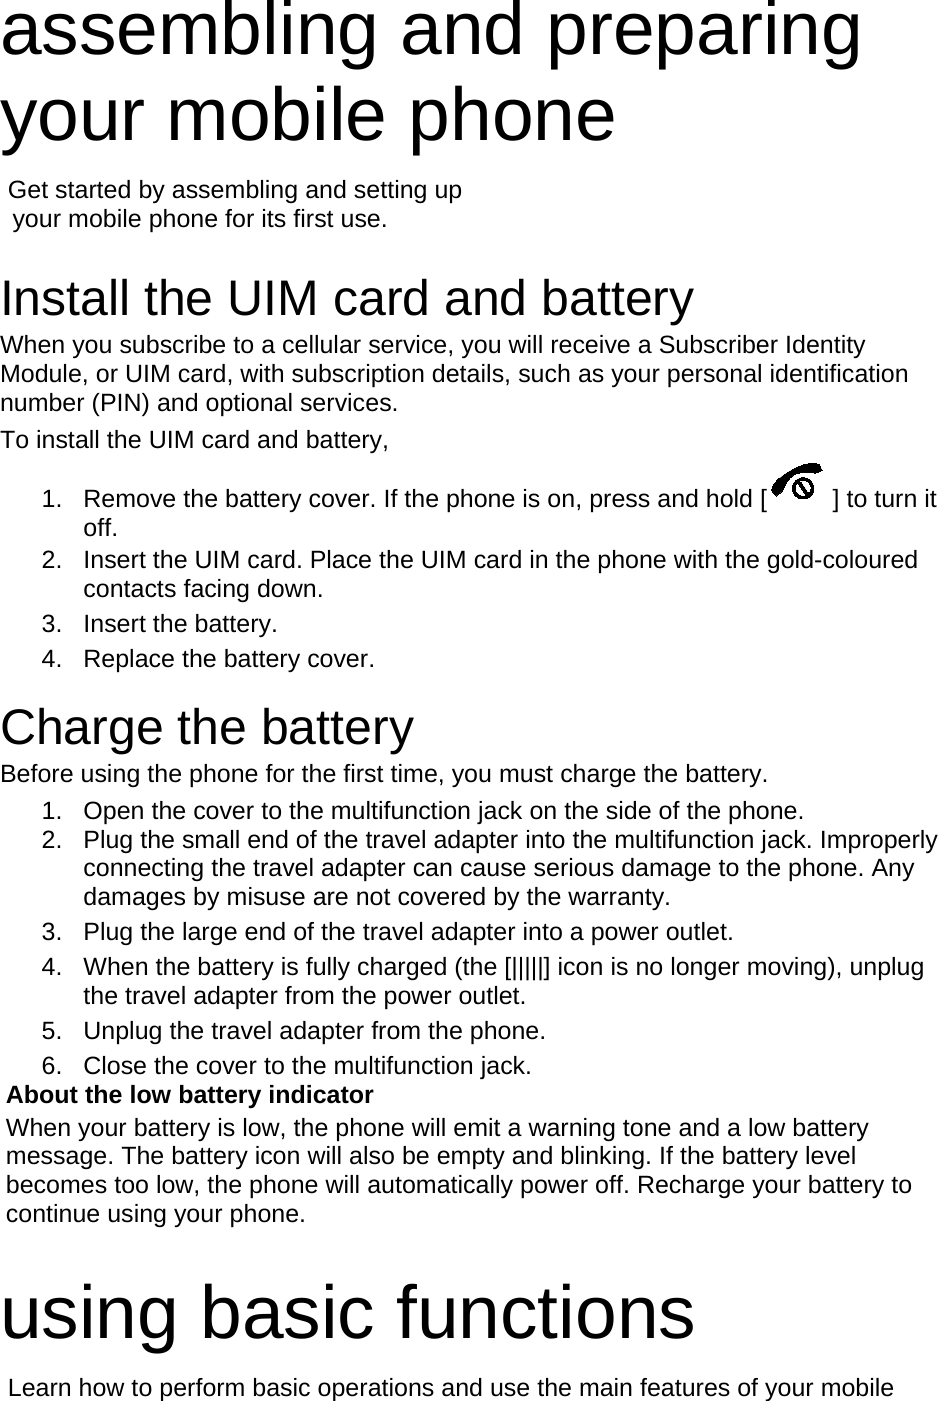 assembling and preparing your mobile phone    Get started by assembling and setting up    your mobile phone for its first use.  Install the UIM card and battery When you subscribe to a cellular service, you will receive a Subscriber Identity Module, or UIM card, with subscription details, such as your personal identification number (PIN) and optional services. To install the UIM card and battery, 1. Remove the battery cover. If the phone is on, press and hold [ ] to turn it off. 2. Insert the UIM card. Place the UIM card in the phone with the gold-coloured contacts facing down. 3. Insert the battery. 4. Replace the battery cover.  Charge the battery Before using the phone for the first time, you must charge the battery. 1. Open the cover to the multifunction jack on the side of the phone. 2. Plug the small end of the travel adapter into the multifunction jack. Improperly connecting the travel adapter can cause serious damage to the phone. Any damages by misuse are not covered by the warranty. 3. Plug the large end of the travel adapter into a power outlet. 4. When the battery is fully charged (the [|||||] icon is no longer moving), unplug the travel adapter from the power outlet. 5. Unplug the travel adapter from the phone. 6. Close the cover to the multifunction jack. About the low battery indicator When your battery is low, the phone will emit a warning tone and a low battery message. The battery icon will also be empty and blinking. If the battery level becomes too low, the phone will automatically power off. Recharge your battery to continue using your phone.  using basic functions  Learn how to perform basic operations and use the main features of your mobile 